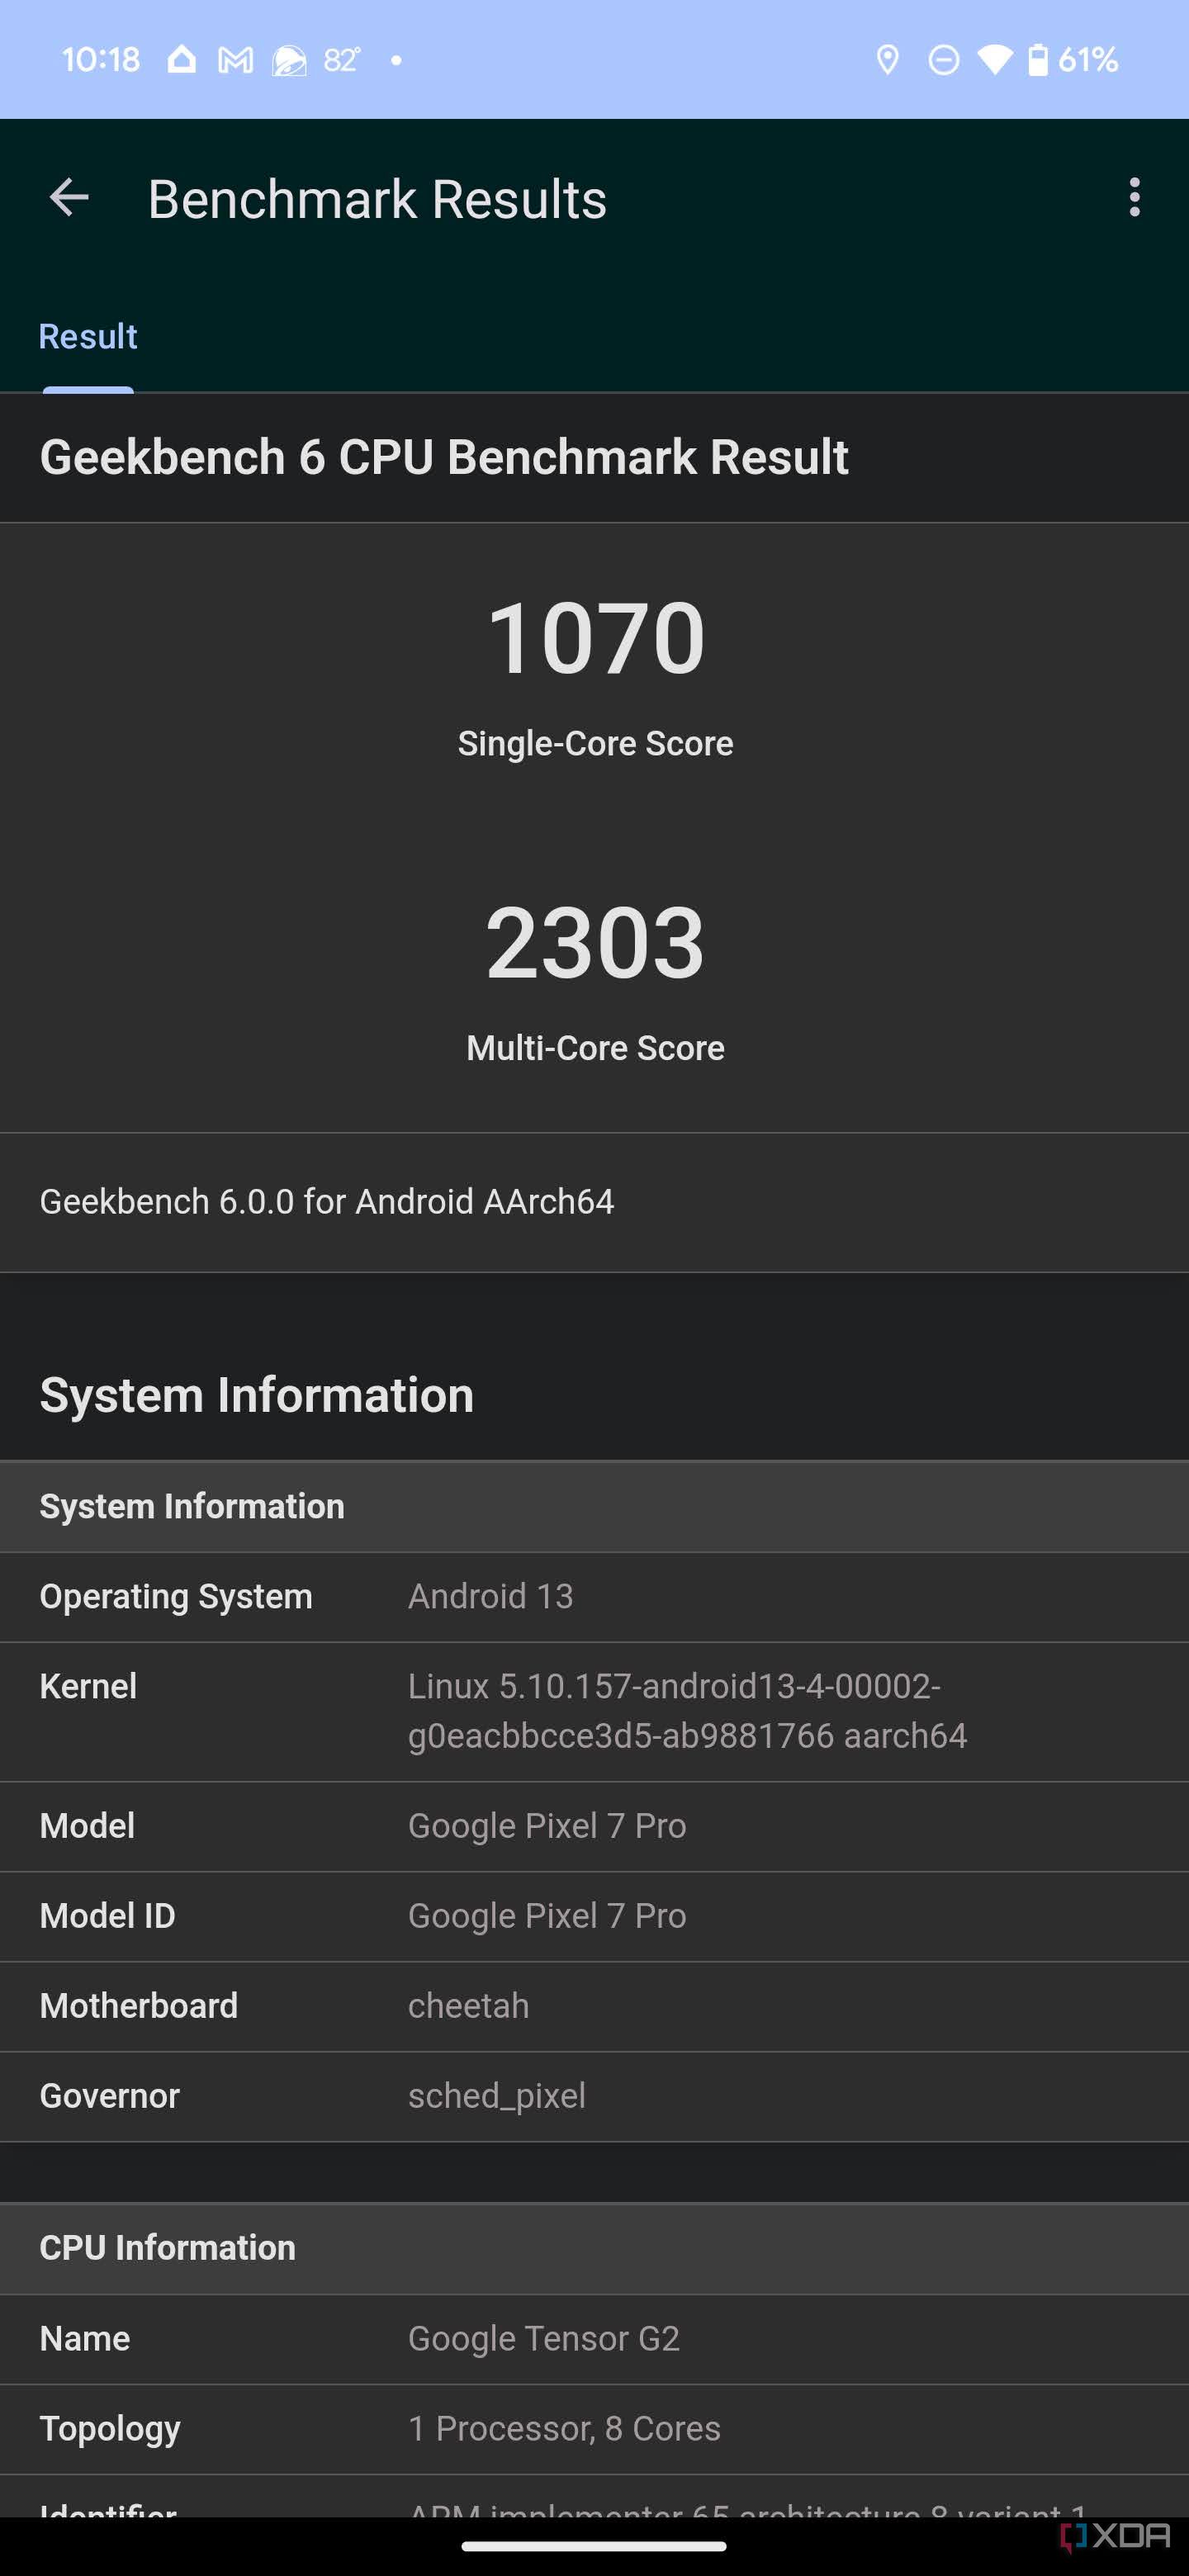 Geekbench 6 results for Google Pixel 7 Pro